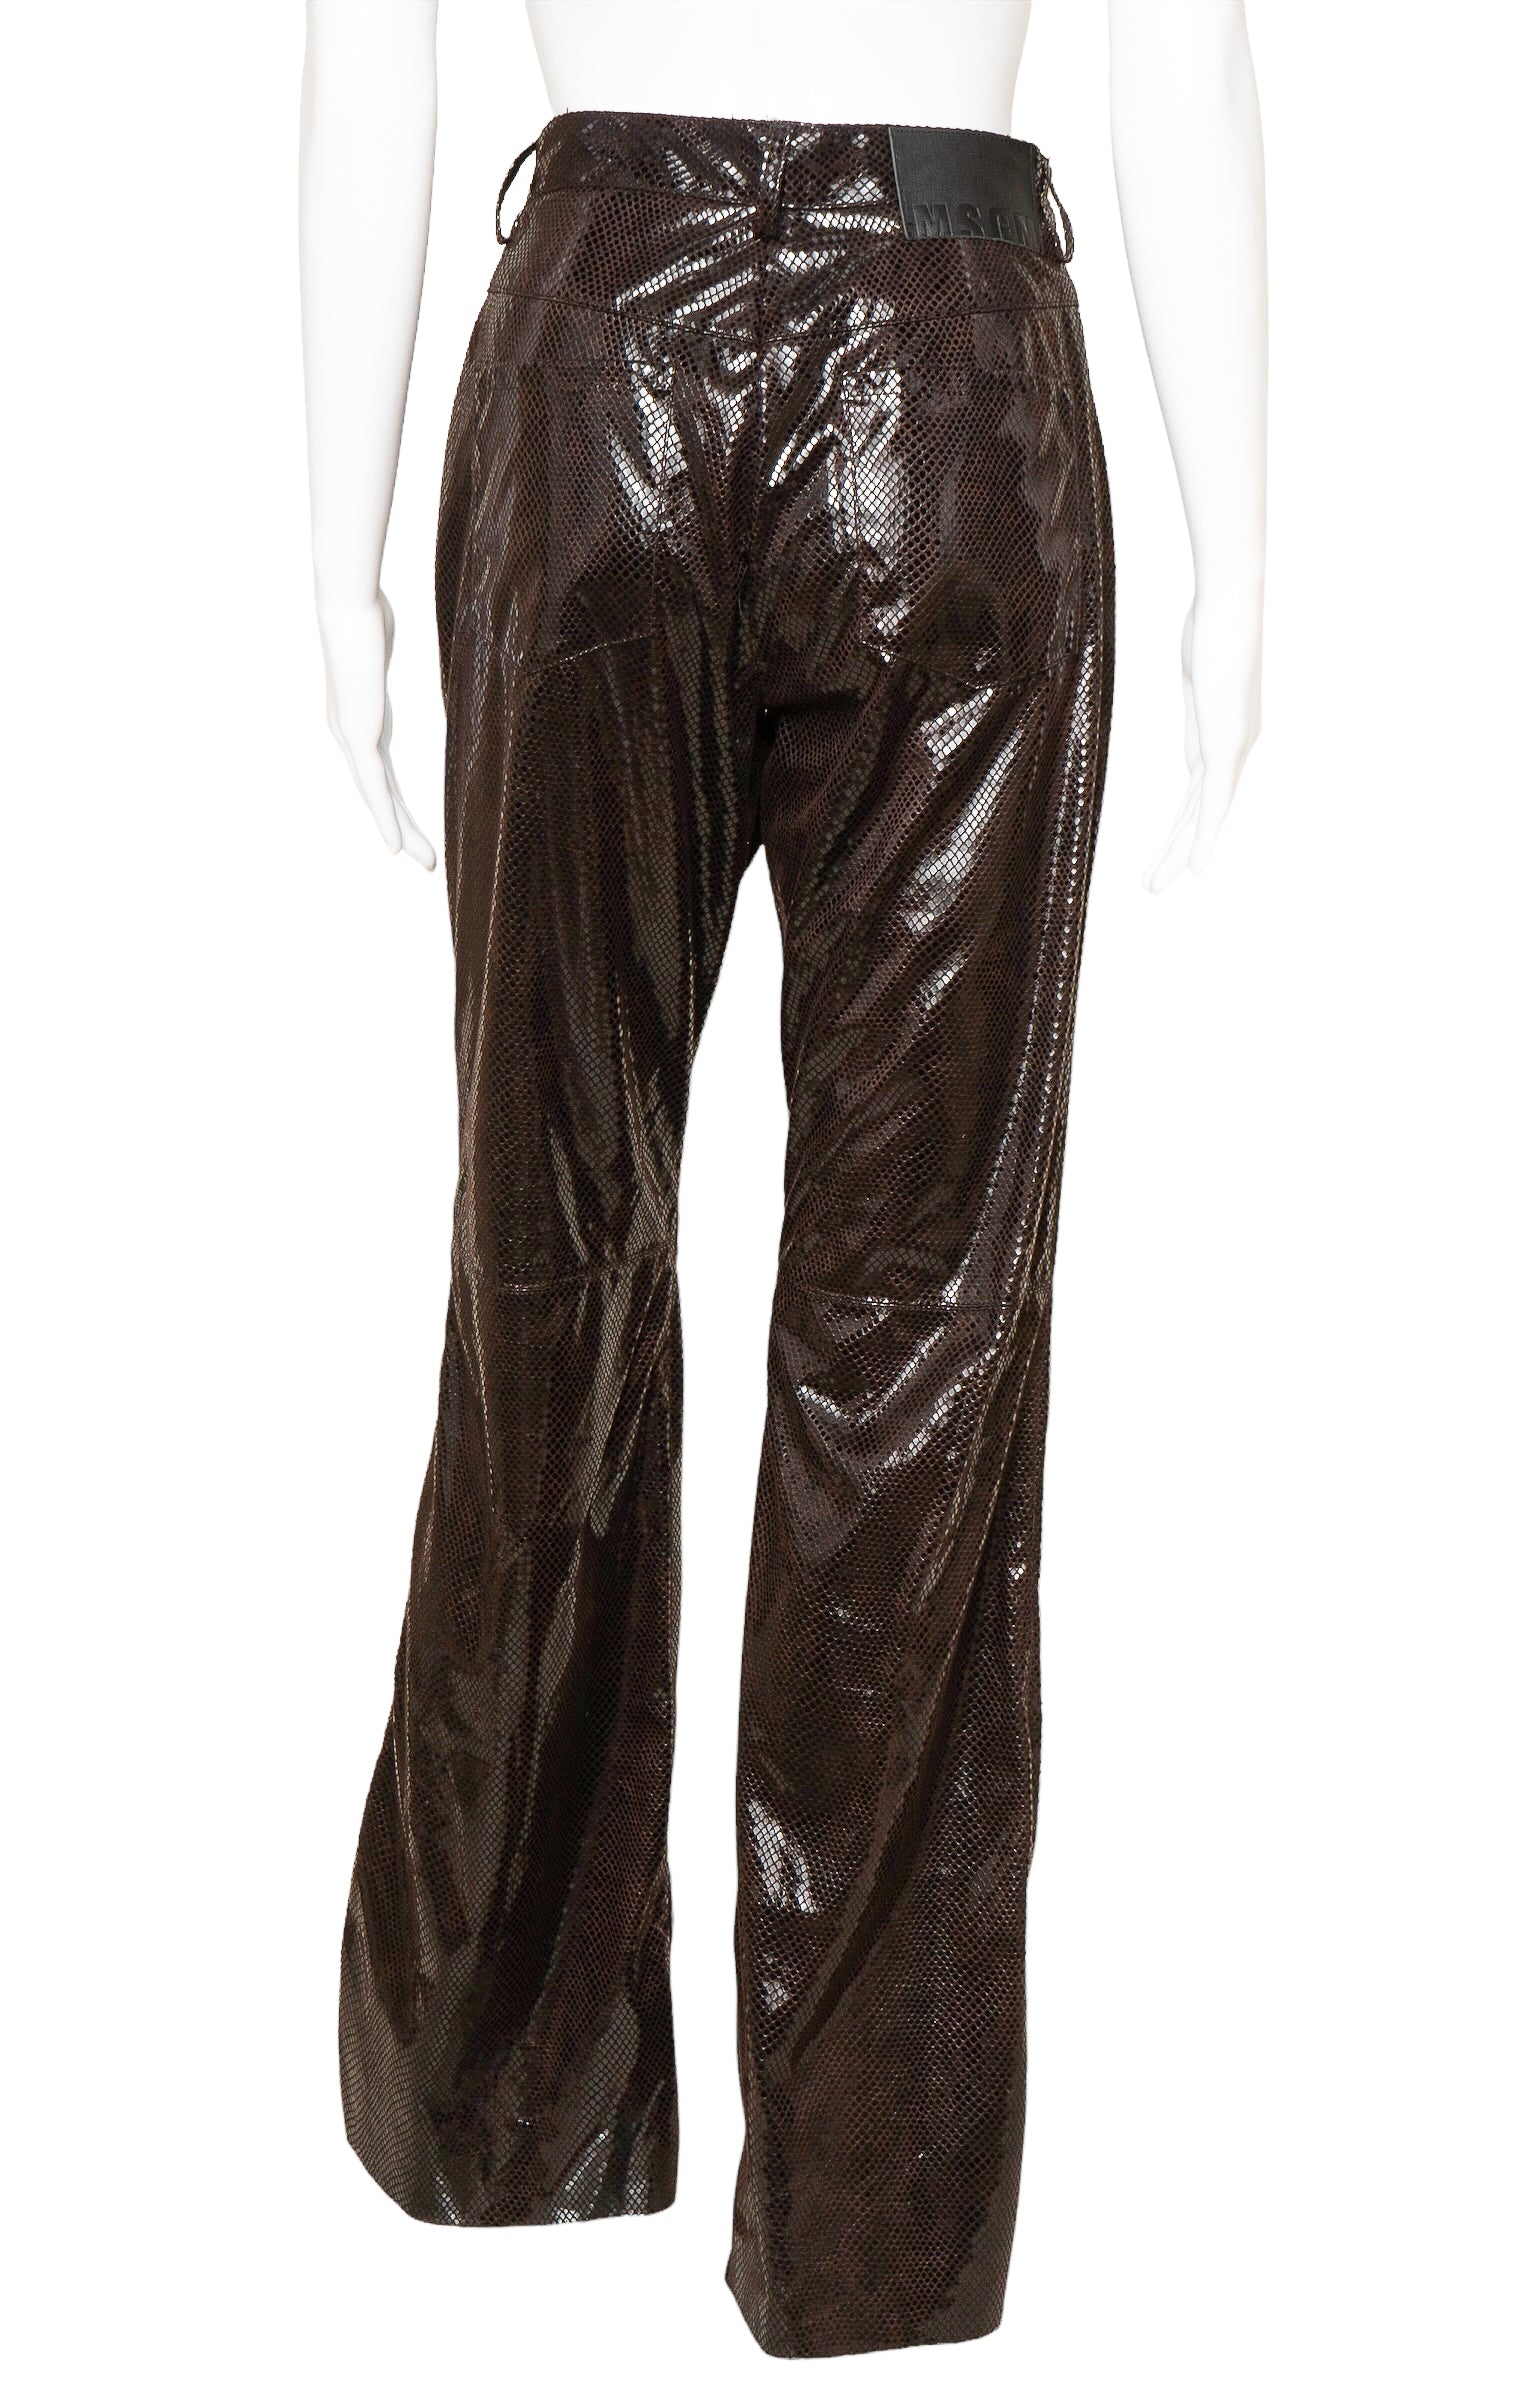 MSGM (RARE) Pants Size: IT 44 / Comparable to US 6-8